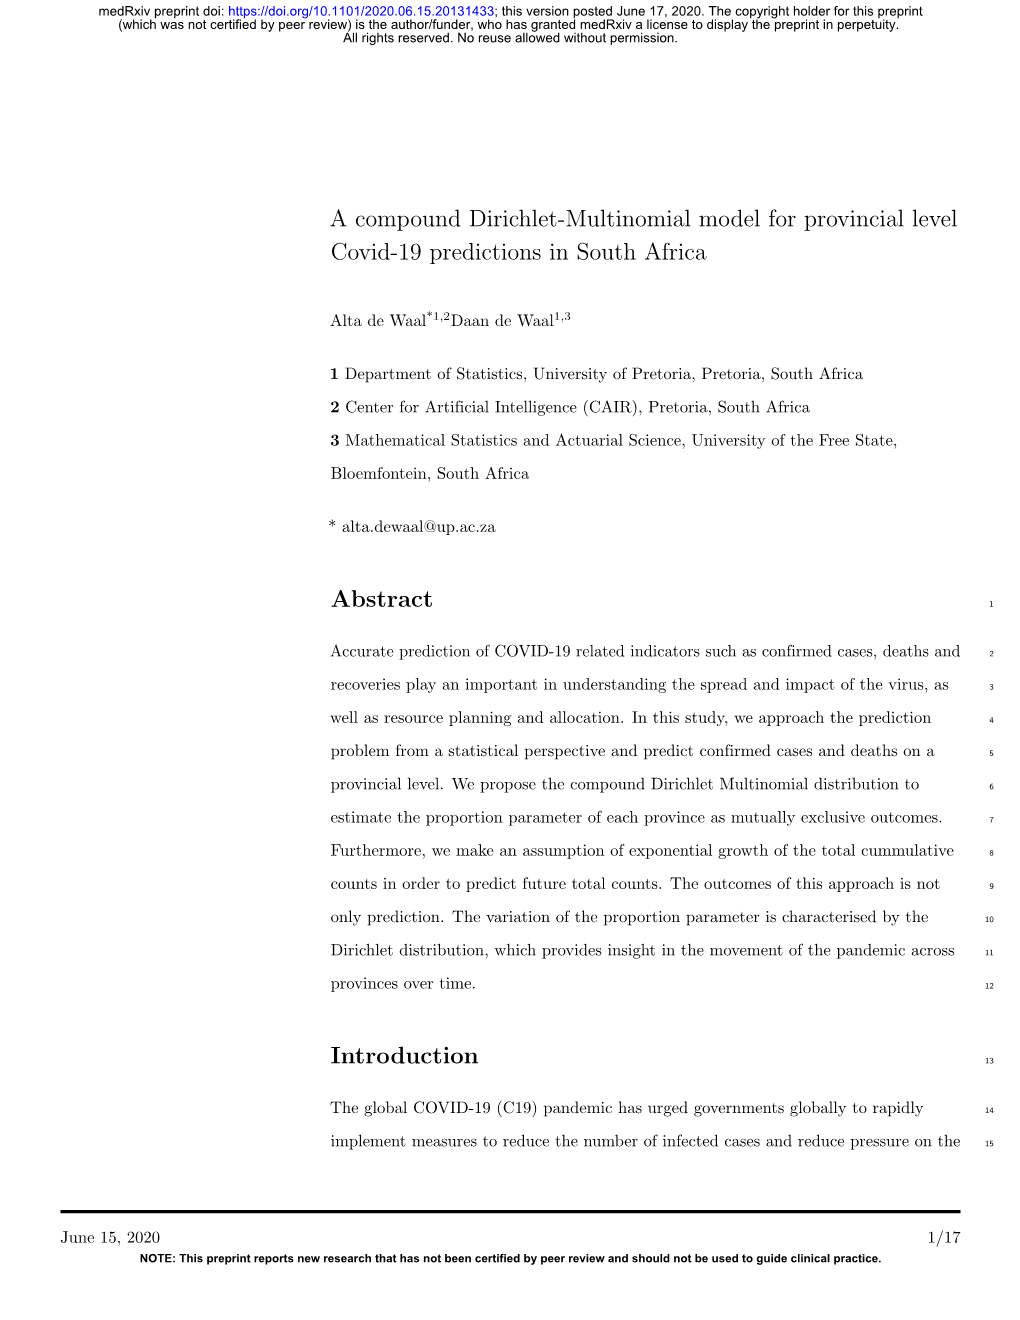 A Compound Dirichlet-Multinomial Model for Provincial Level Covid-19 Predictions in South Africa